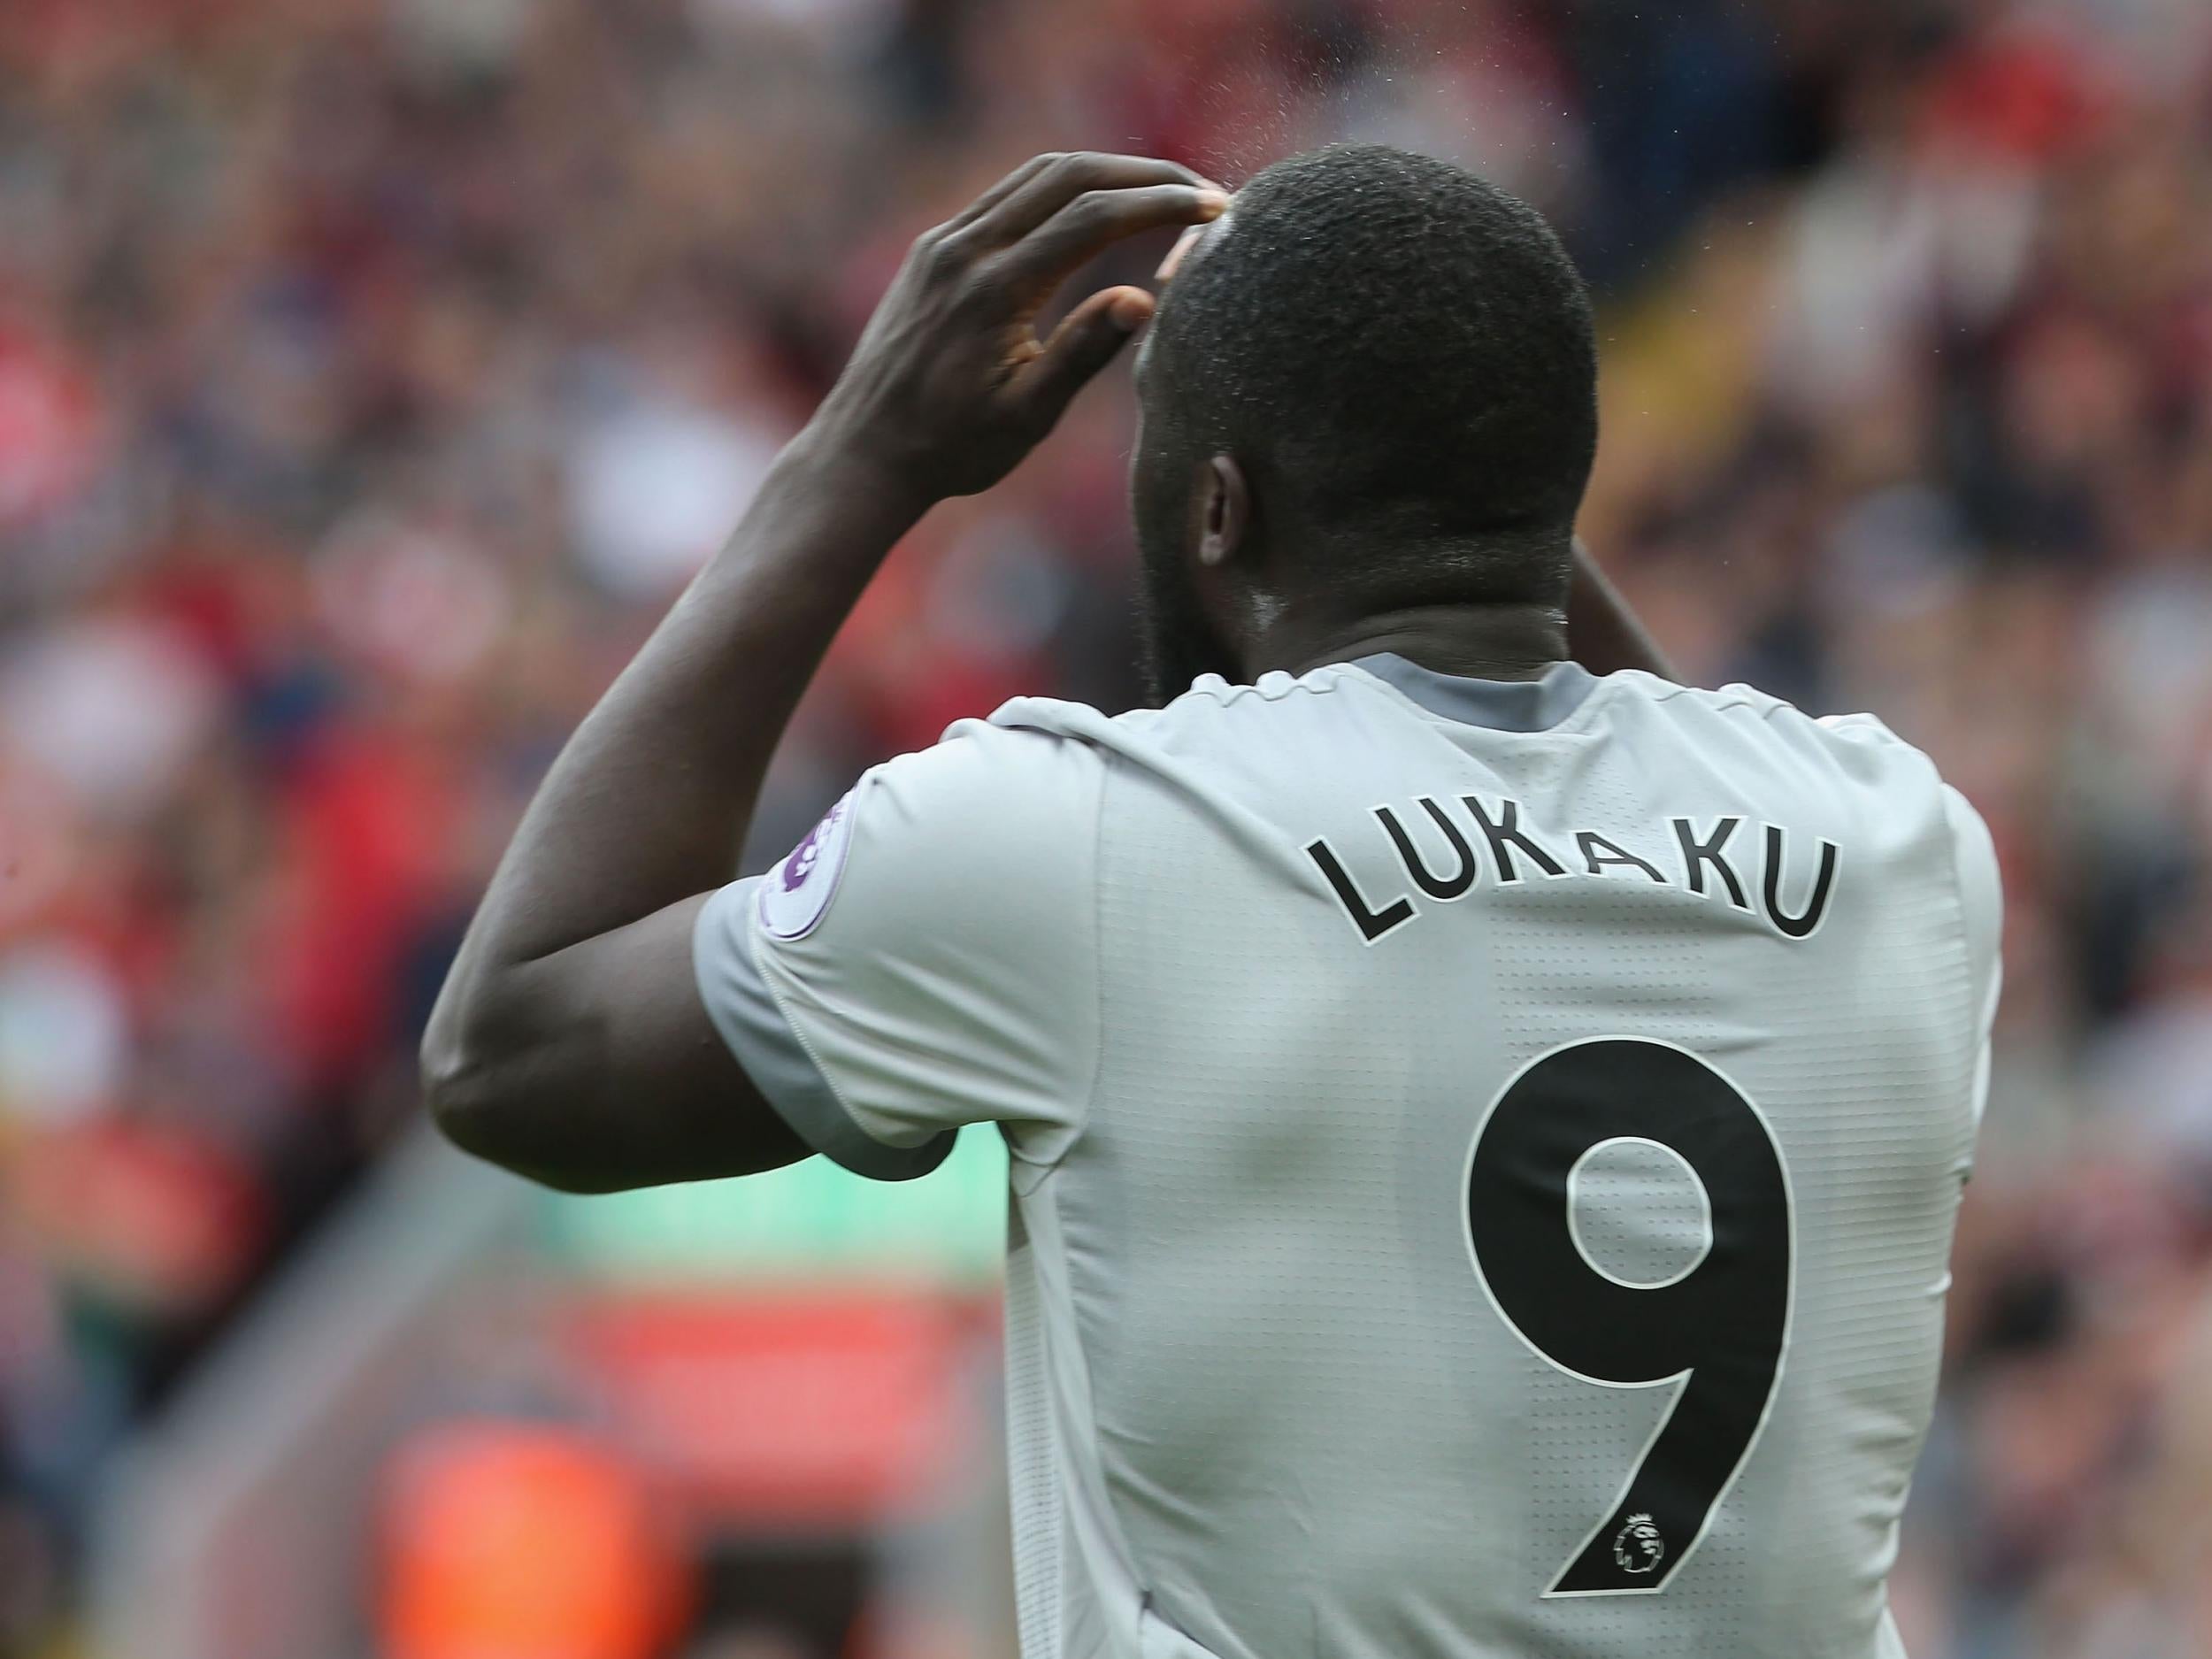 Lukaku was guilty of missing a great chance